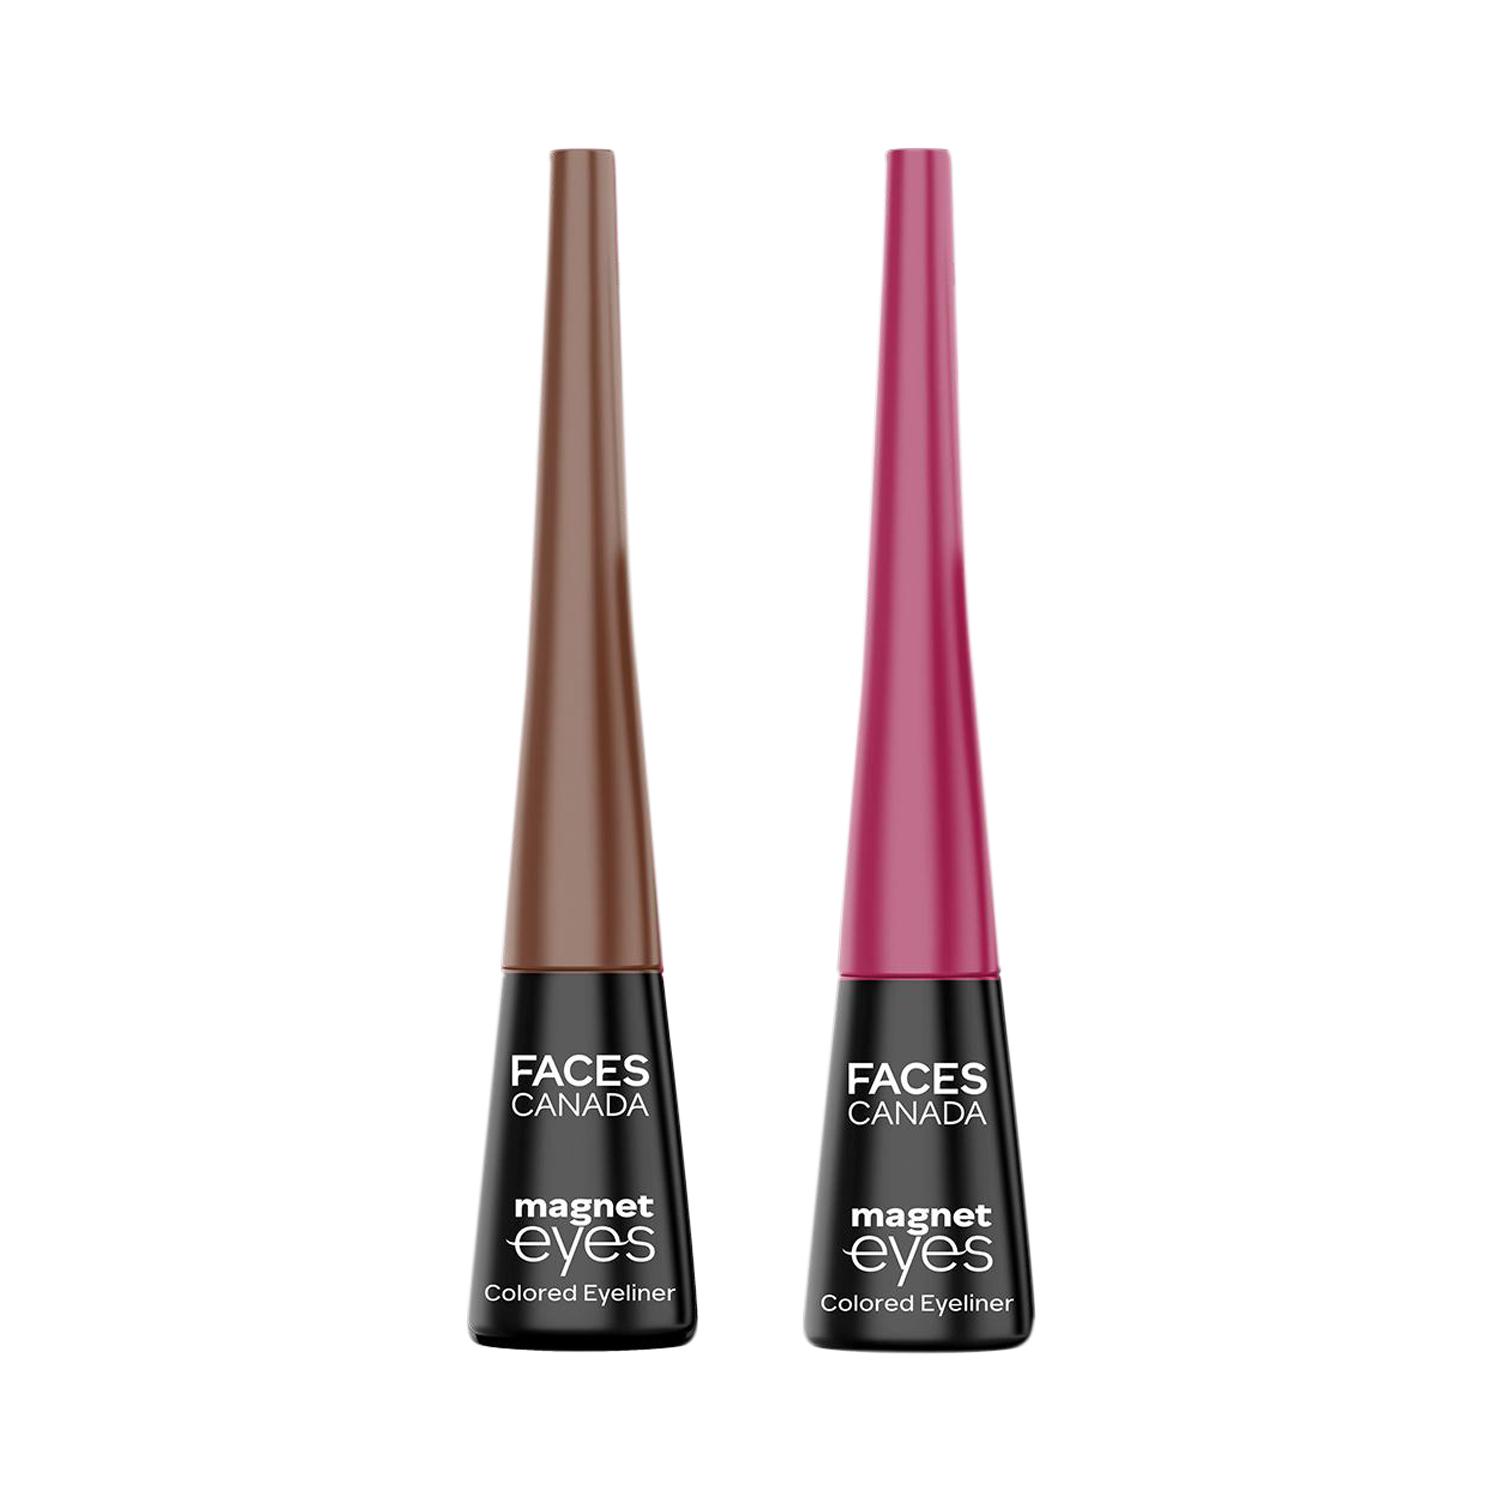 Faces Canada | Faces Canada Magneteyes Color Eyeliners Combo - Powerful Brown and Graceful Burgundy (Pack of 2)